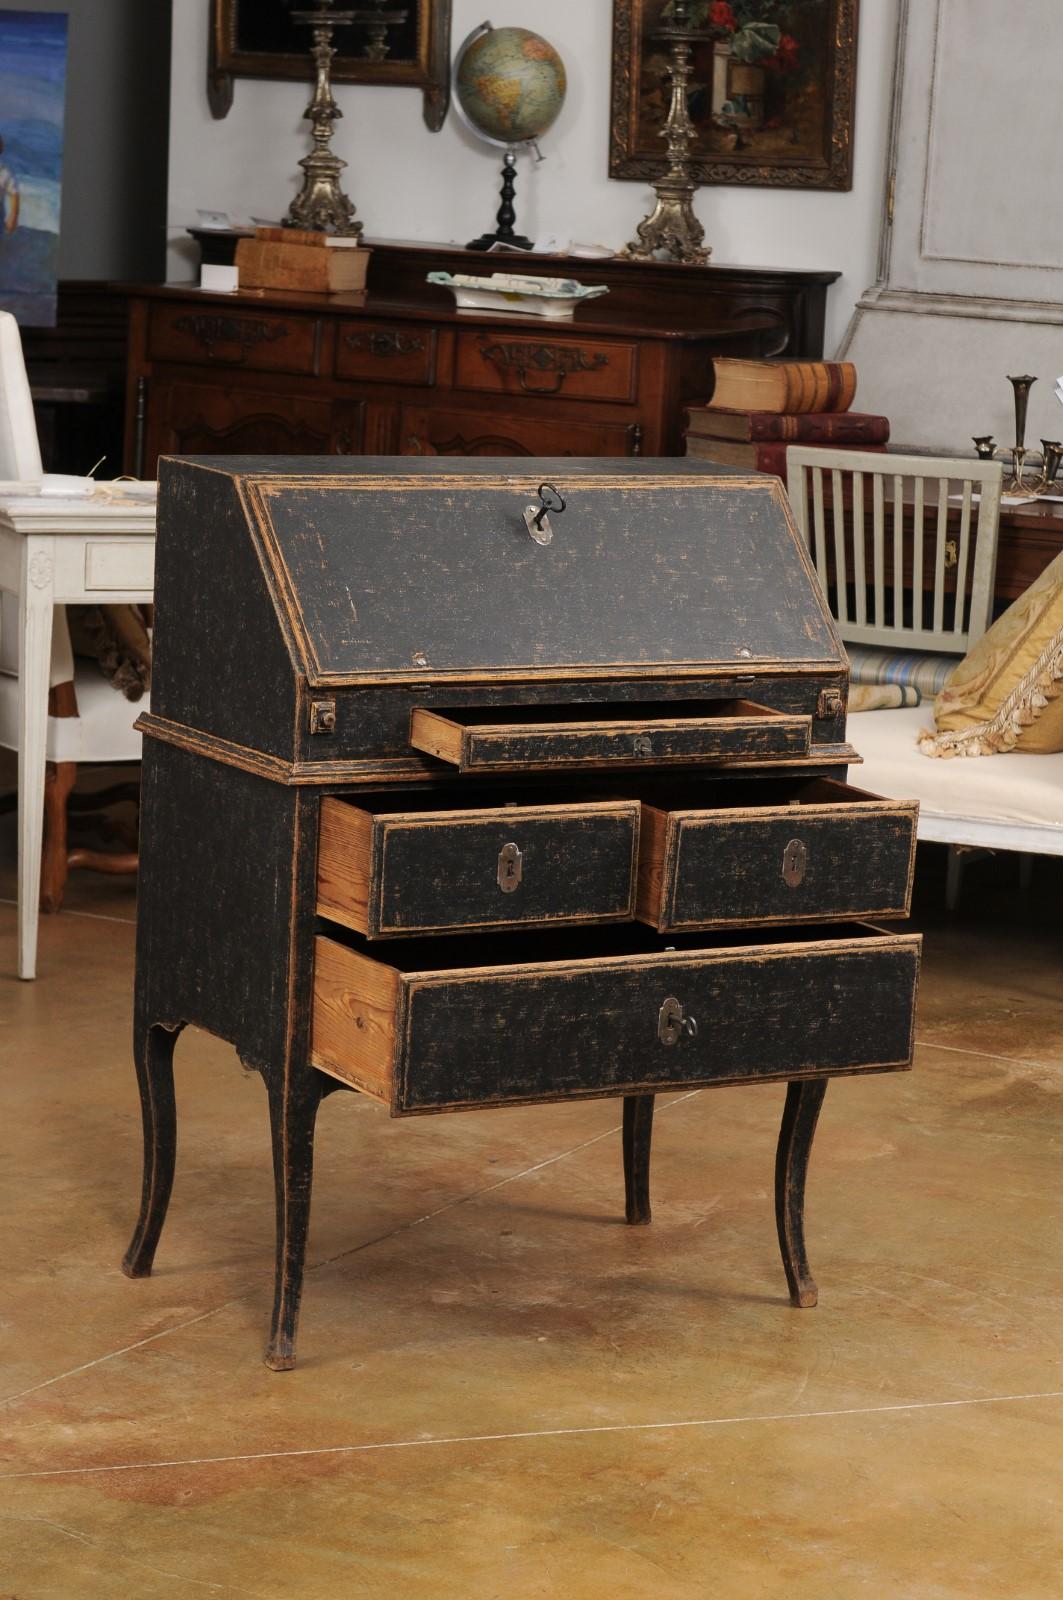 A Swedish Rococo period two-part slant-front desk from the 18th century, repainted in black with a blue interior and later iron hardware. Created in Sweden during the Rococo period, this two-part secretary features a narrow rectangular top sitting